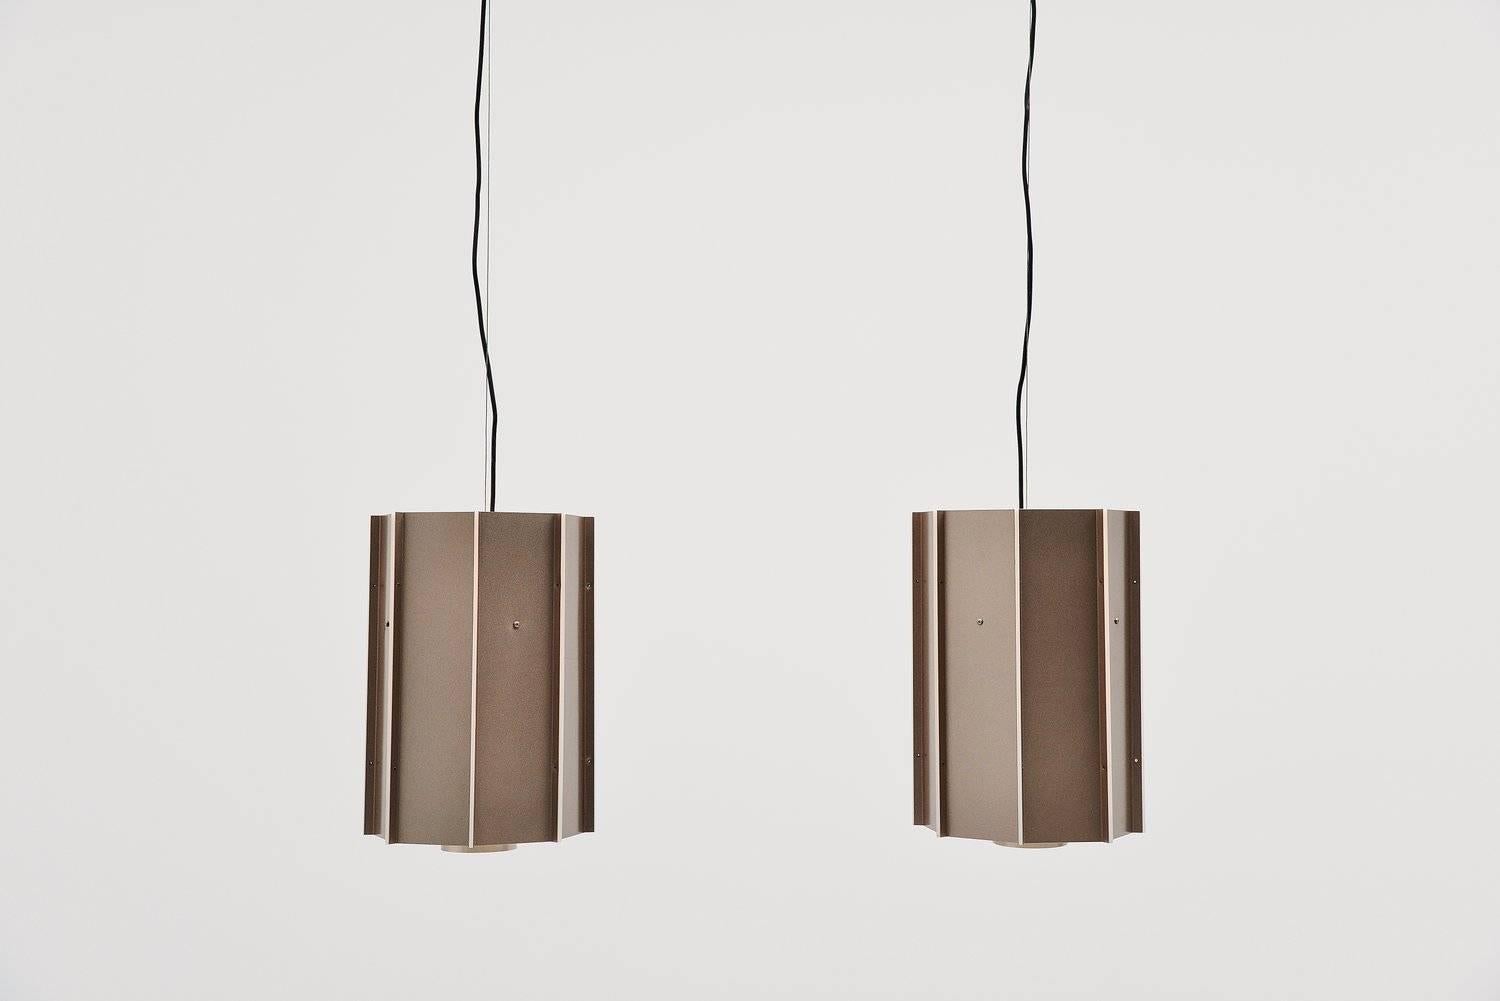 Large lot of ceiling lamps designed and made by RAAK, Amsterdam, 1970. These lamps have a copper color shade and between the layers there is plexiglas for a very nice light effect when lit. The lamps have a round diffuser at the bottom and uses one